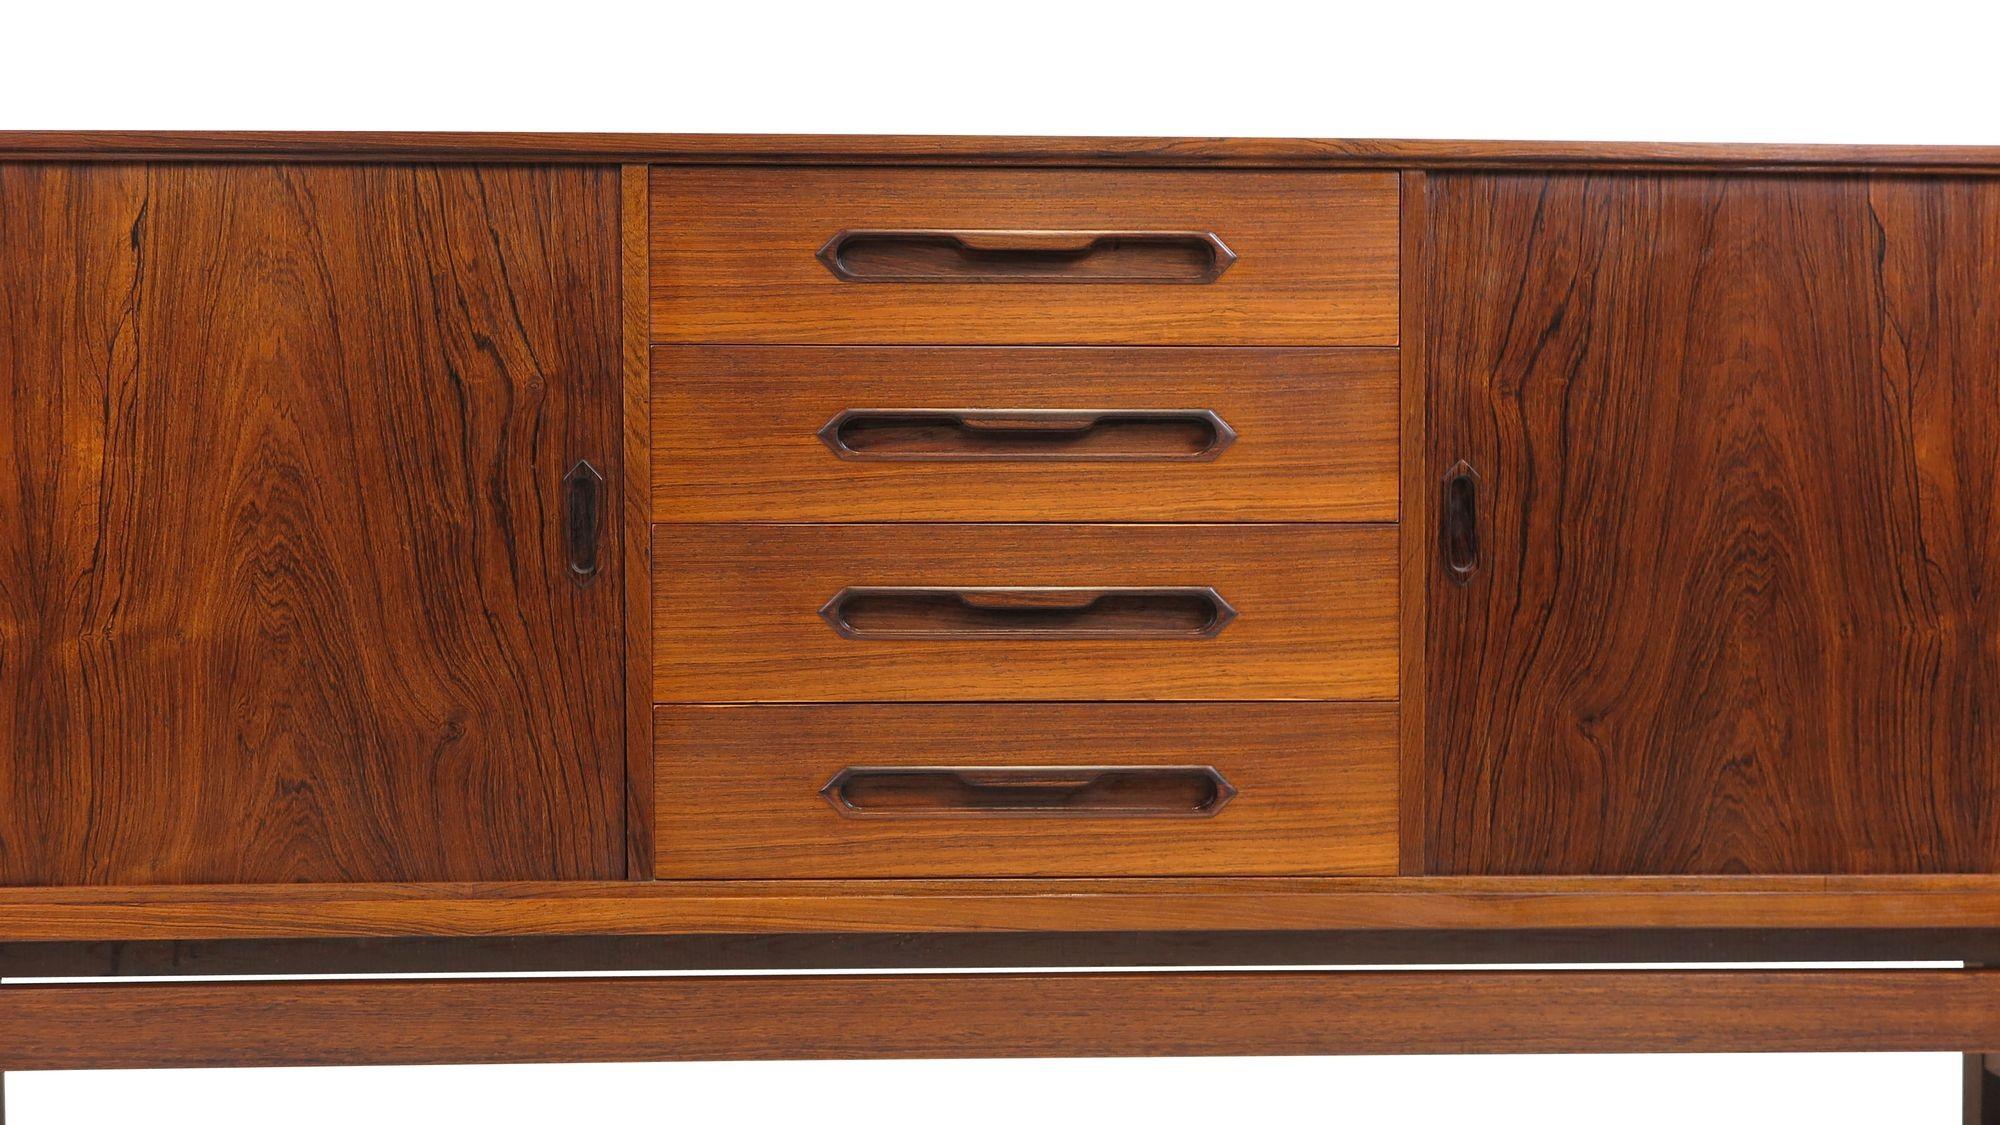 Finely crafted mid-century rosewood credenza designed by Johannes Andersen for Silkeborg Møbelfabrik, Model 93, circa 1960, Denmark. The sideboard is handcrafted from book-matched old-growth rosewood with a pair of tambour doors and center drawers